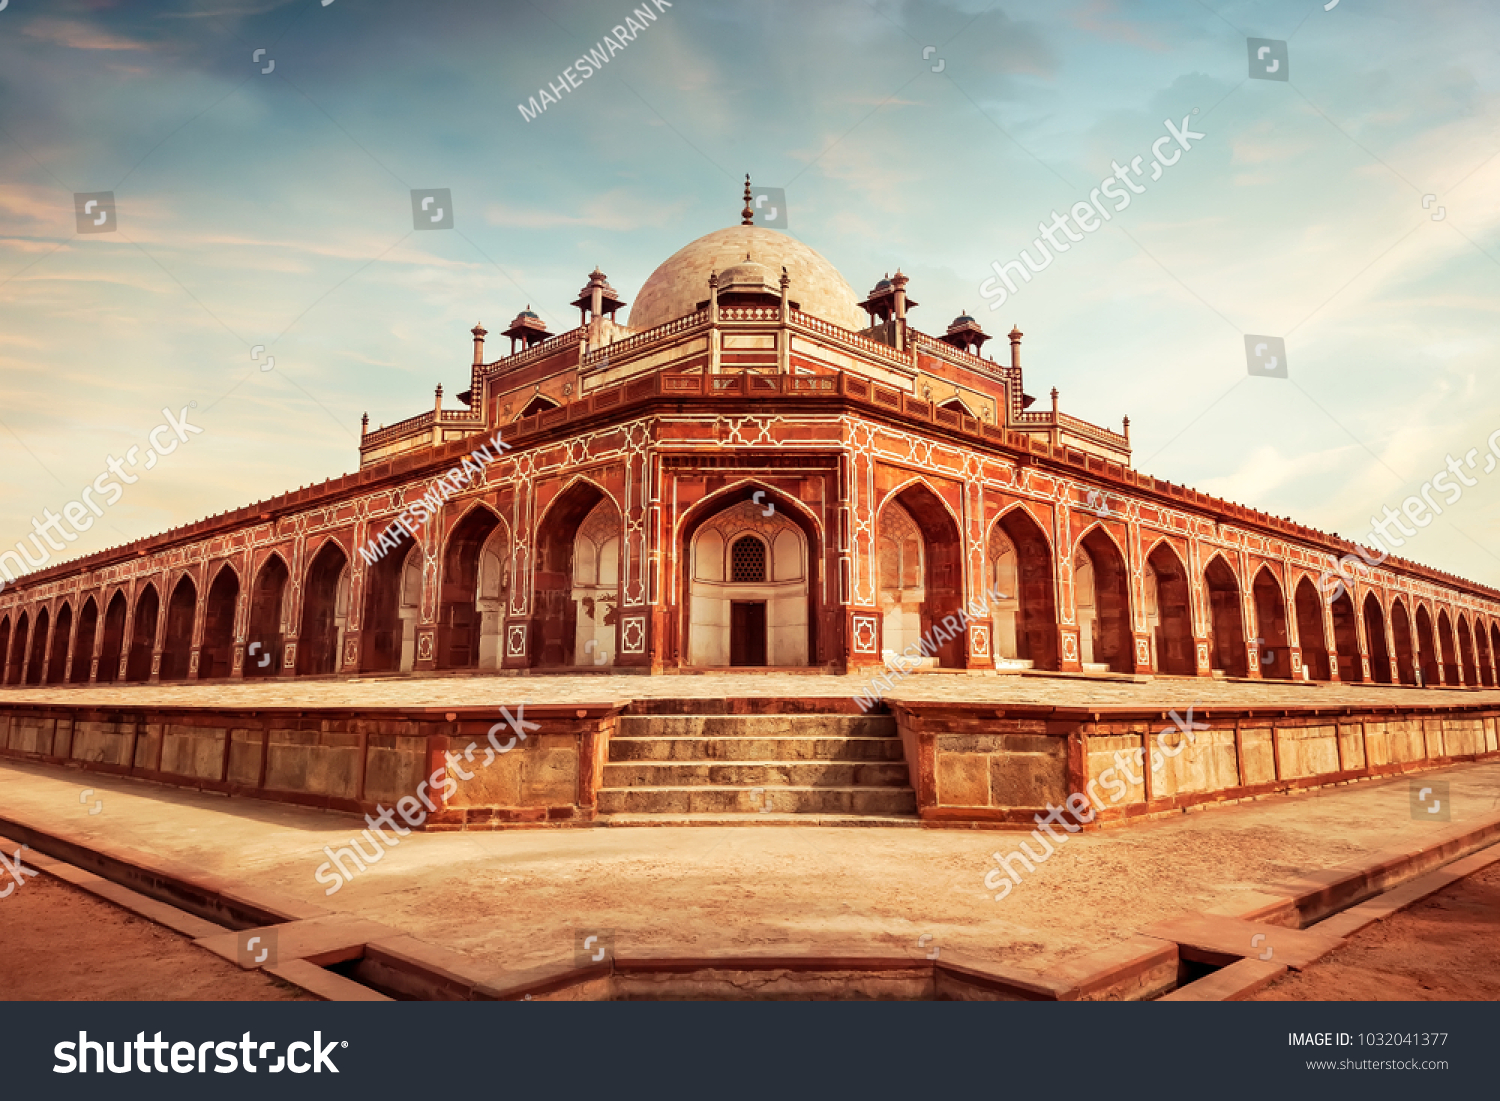 Humayun's tomb, built in the 16th century; is the resting place of the Mughal Emperor Humayun in Delhi, India. It is a UNESCO World Heritage site. #1032041377